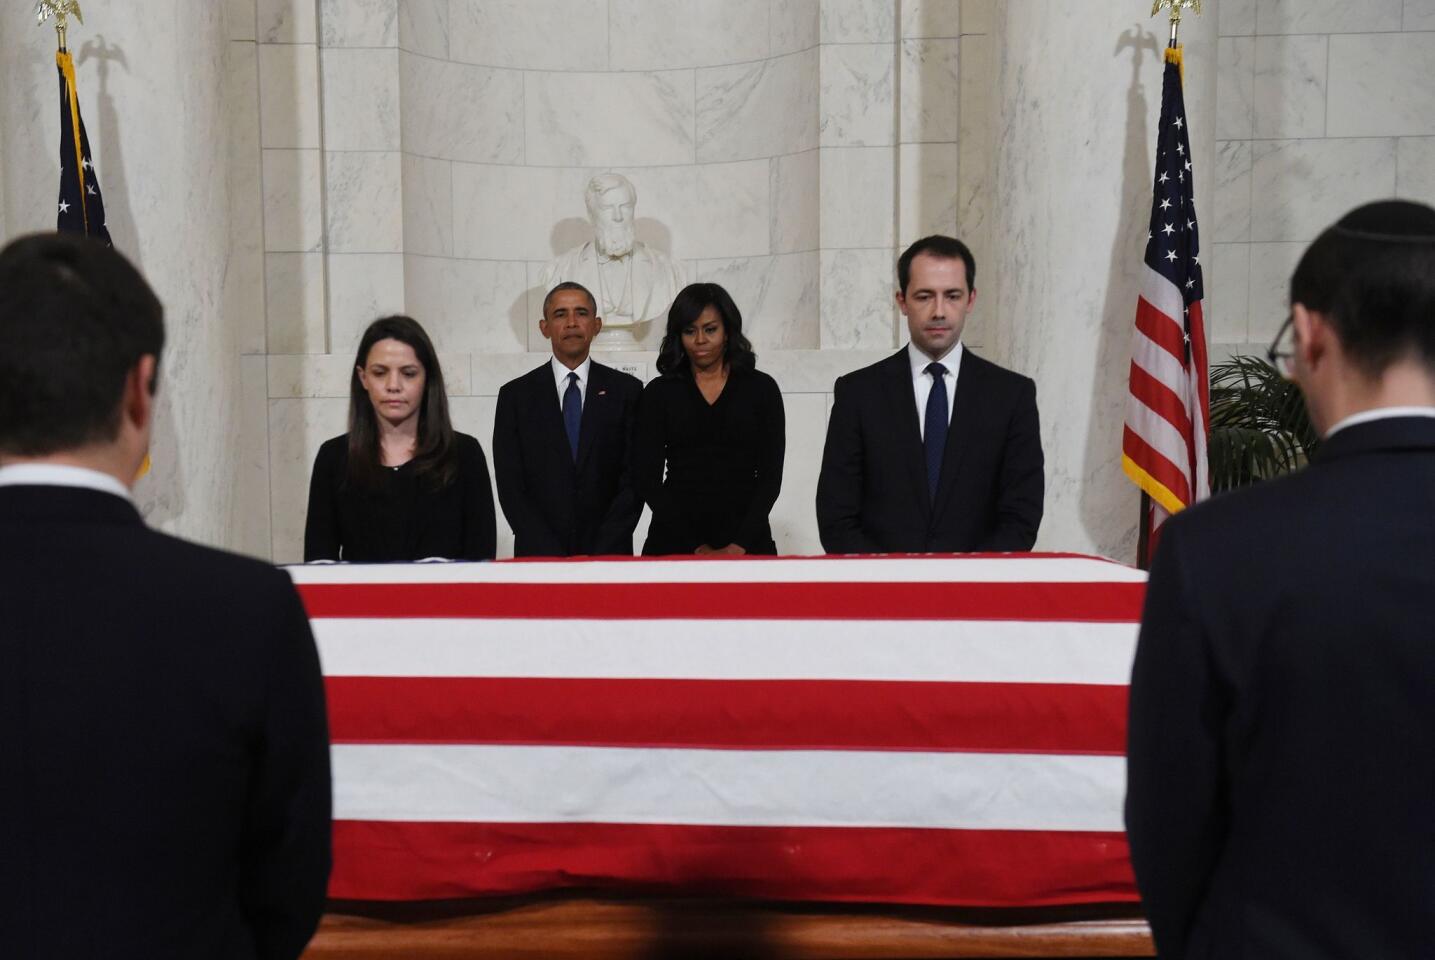 Supreme Court pays respects to Justice Antonin Scalia